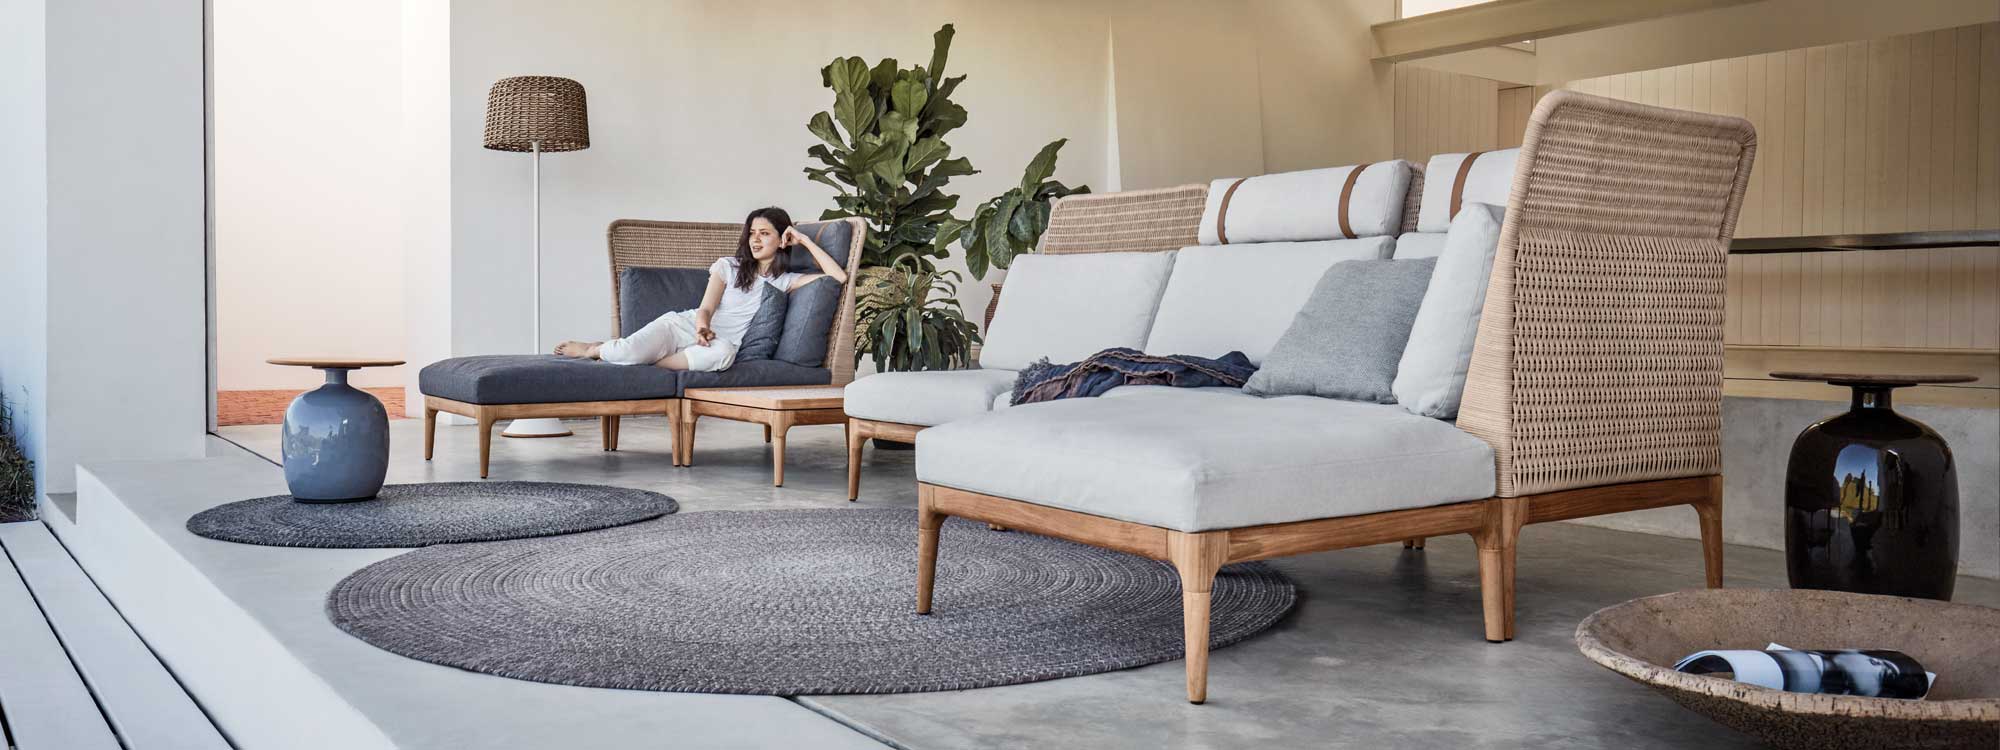 Image of woman lying back in Lima luxury rattan daybed next to Lima garden sofa and Blow side tables